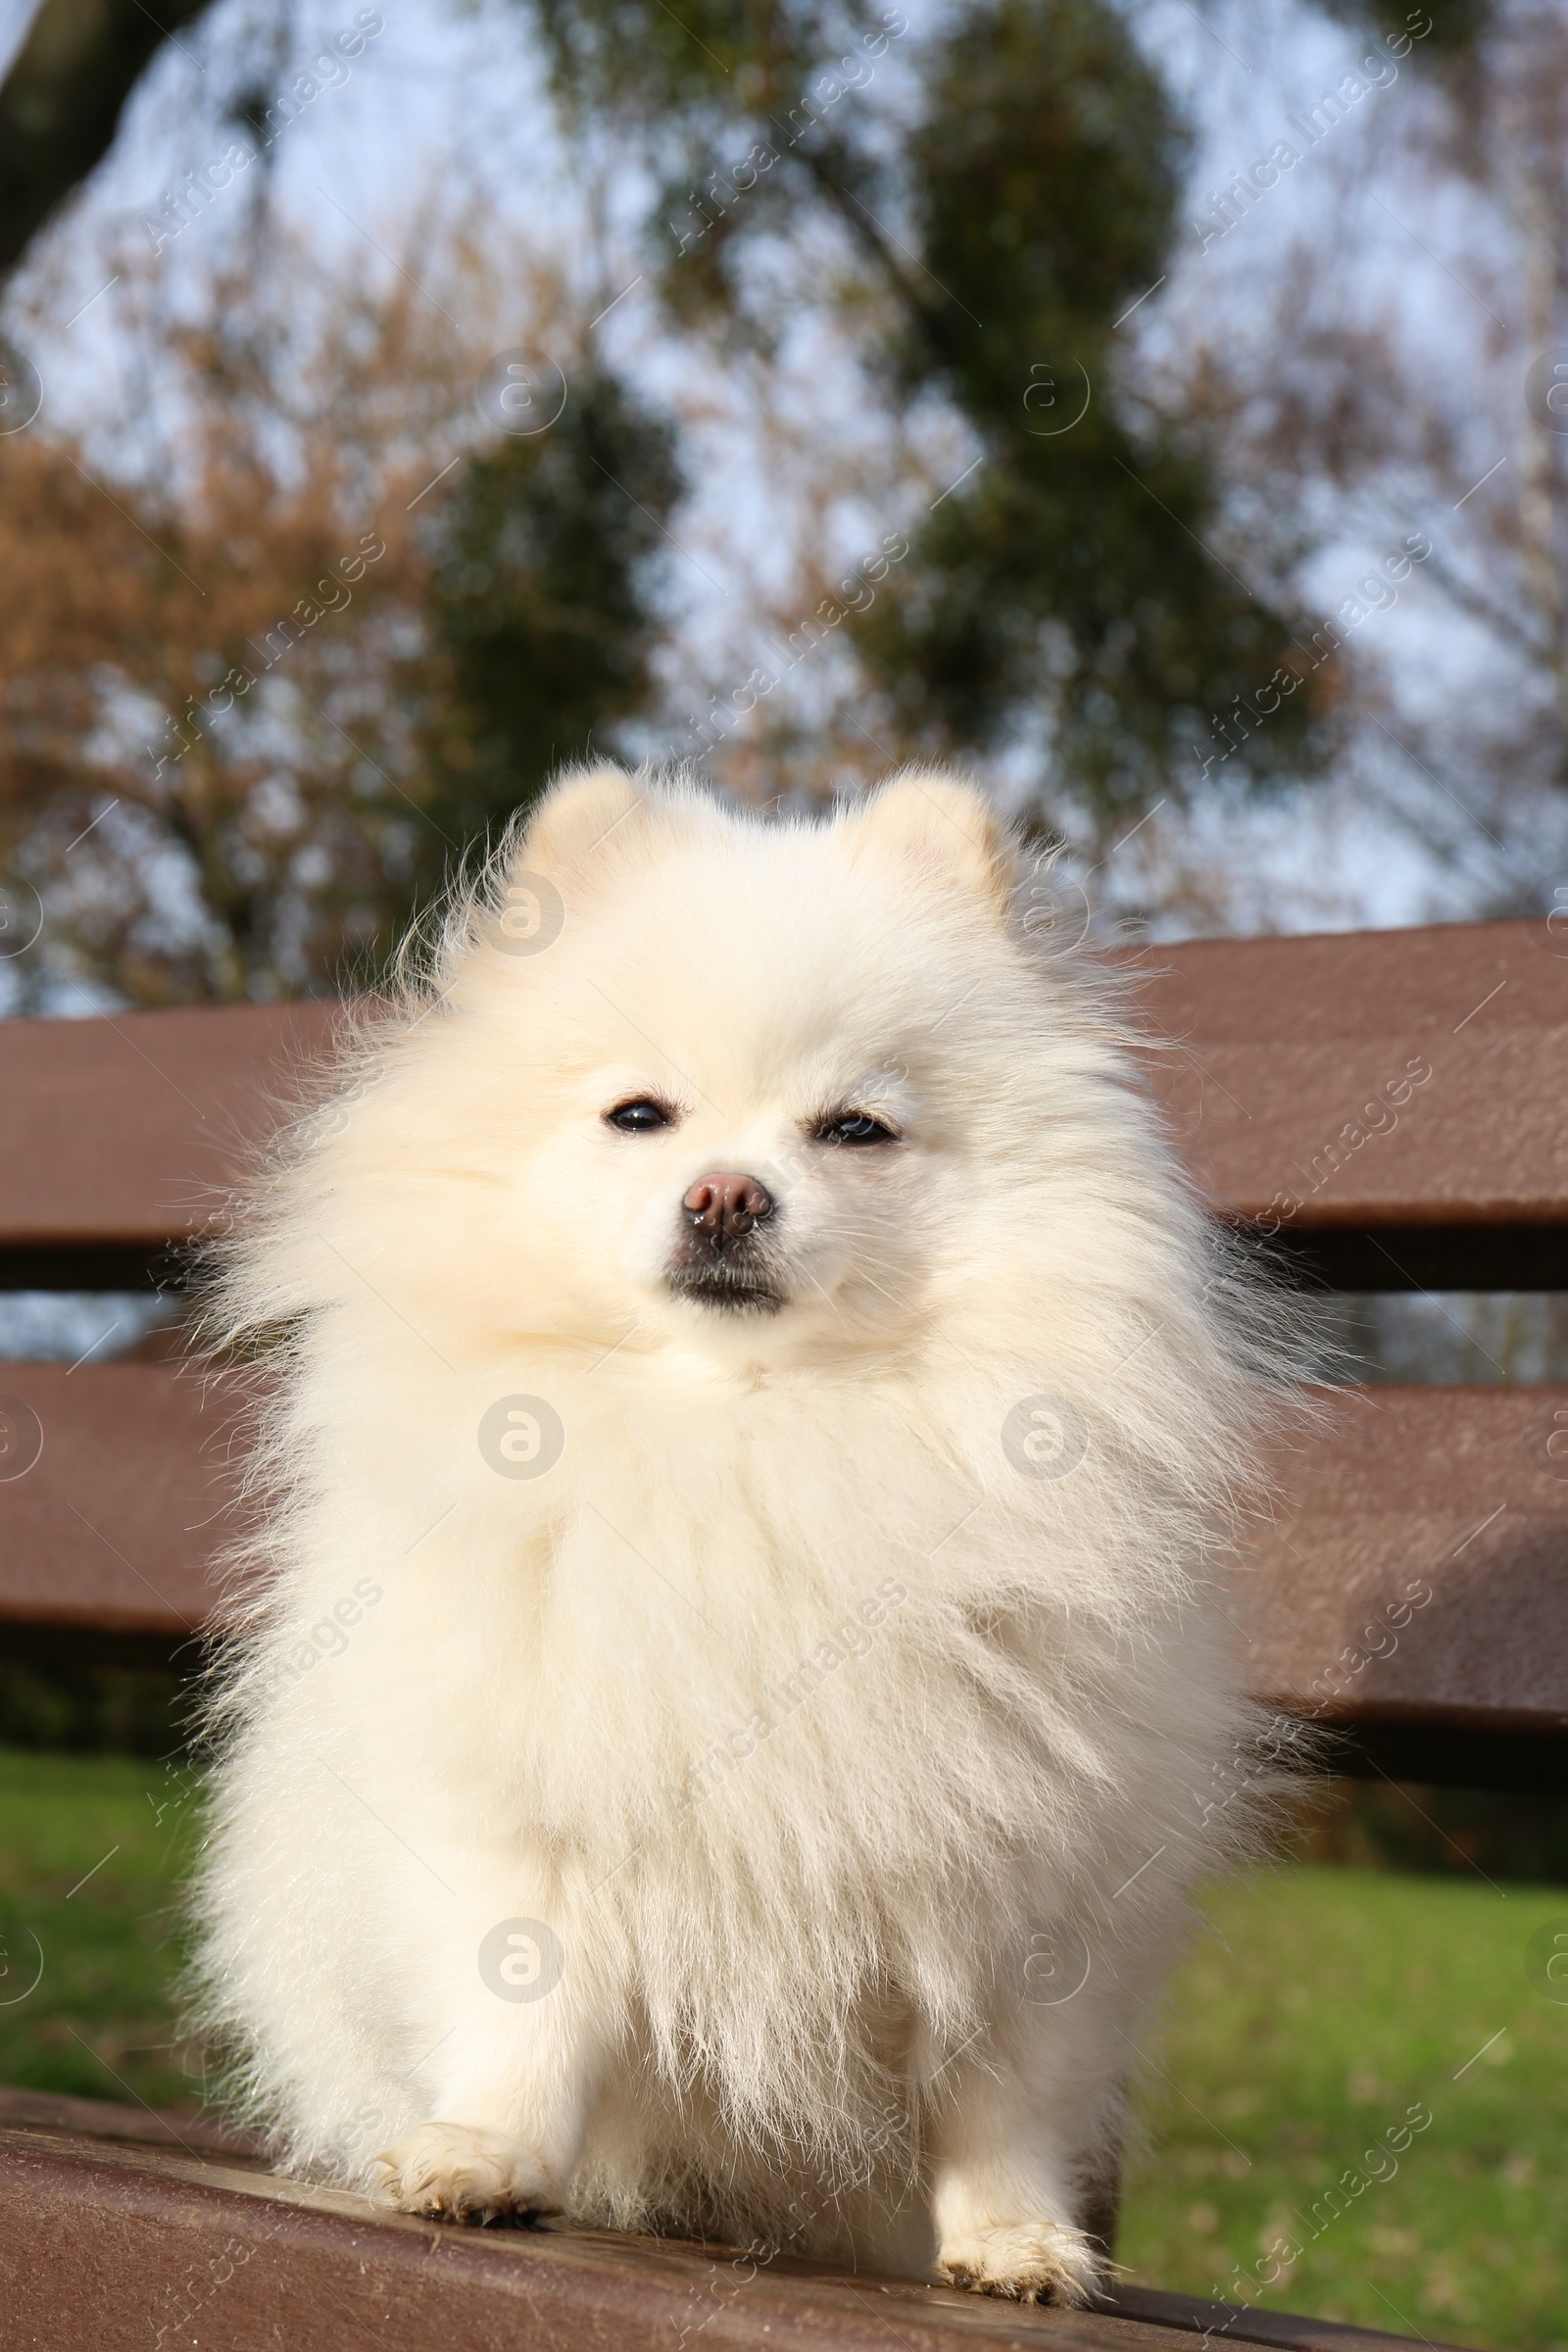 Photo of Cute fluffy Pomeranian dog on wooden bench outdoors. Lovely pet